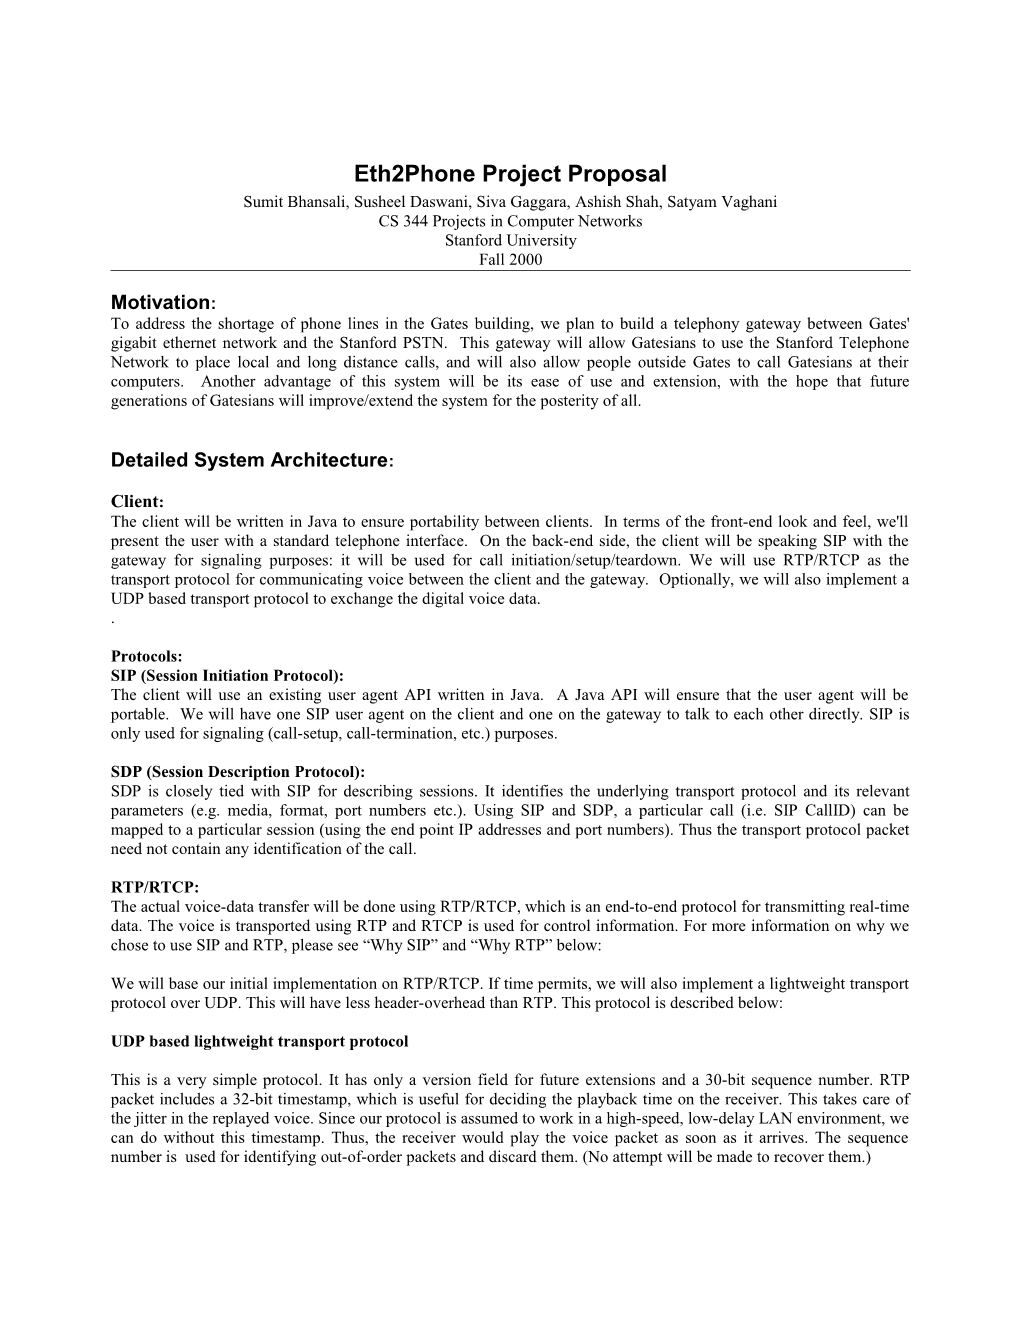 Eth2phone Project Proposal